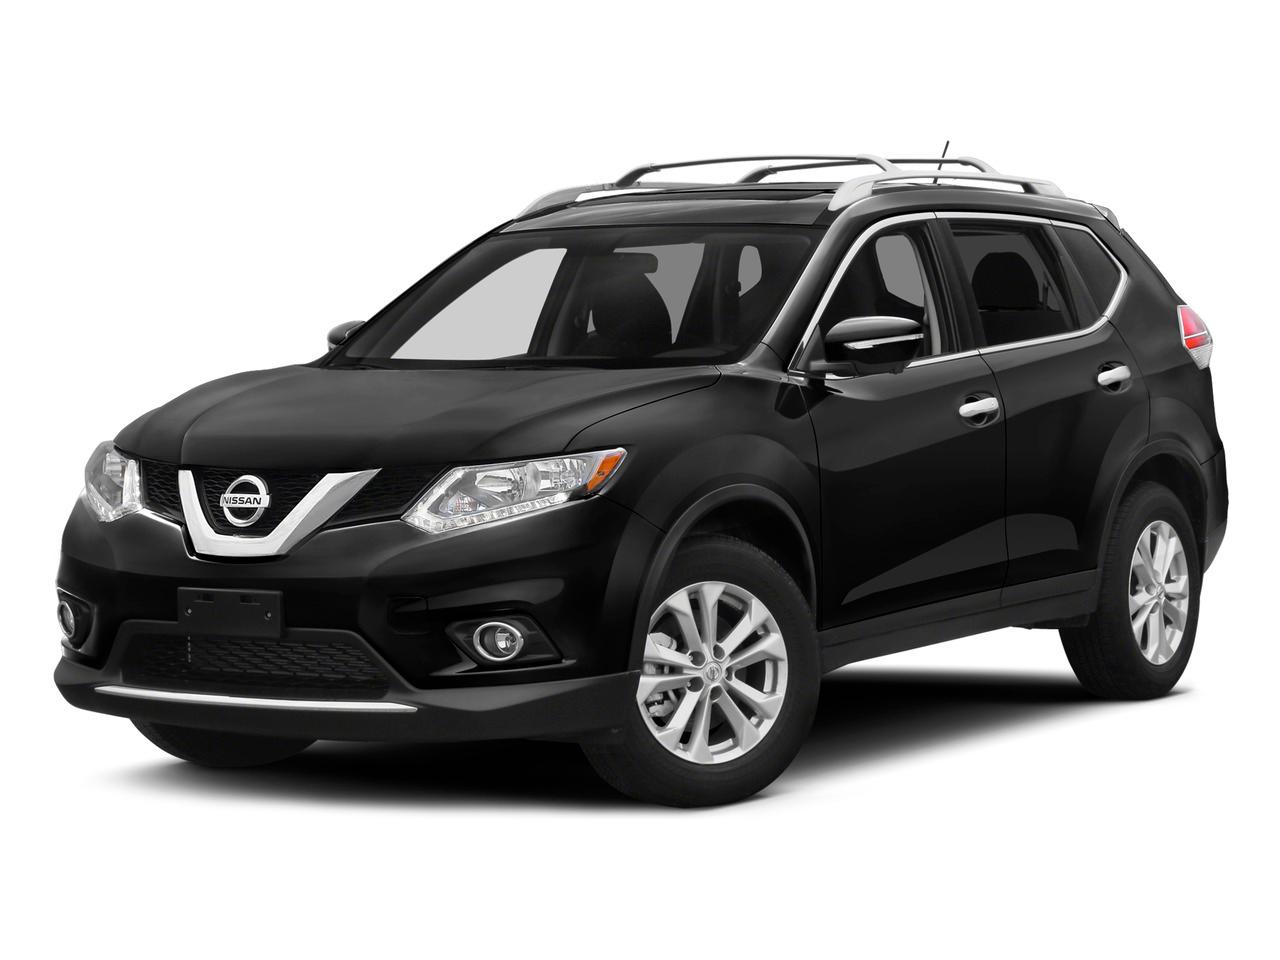 2015 Nissan Rogue Vehicle Photo in Peoria, IL 61615